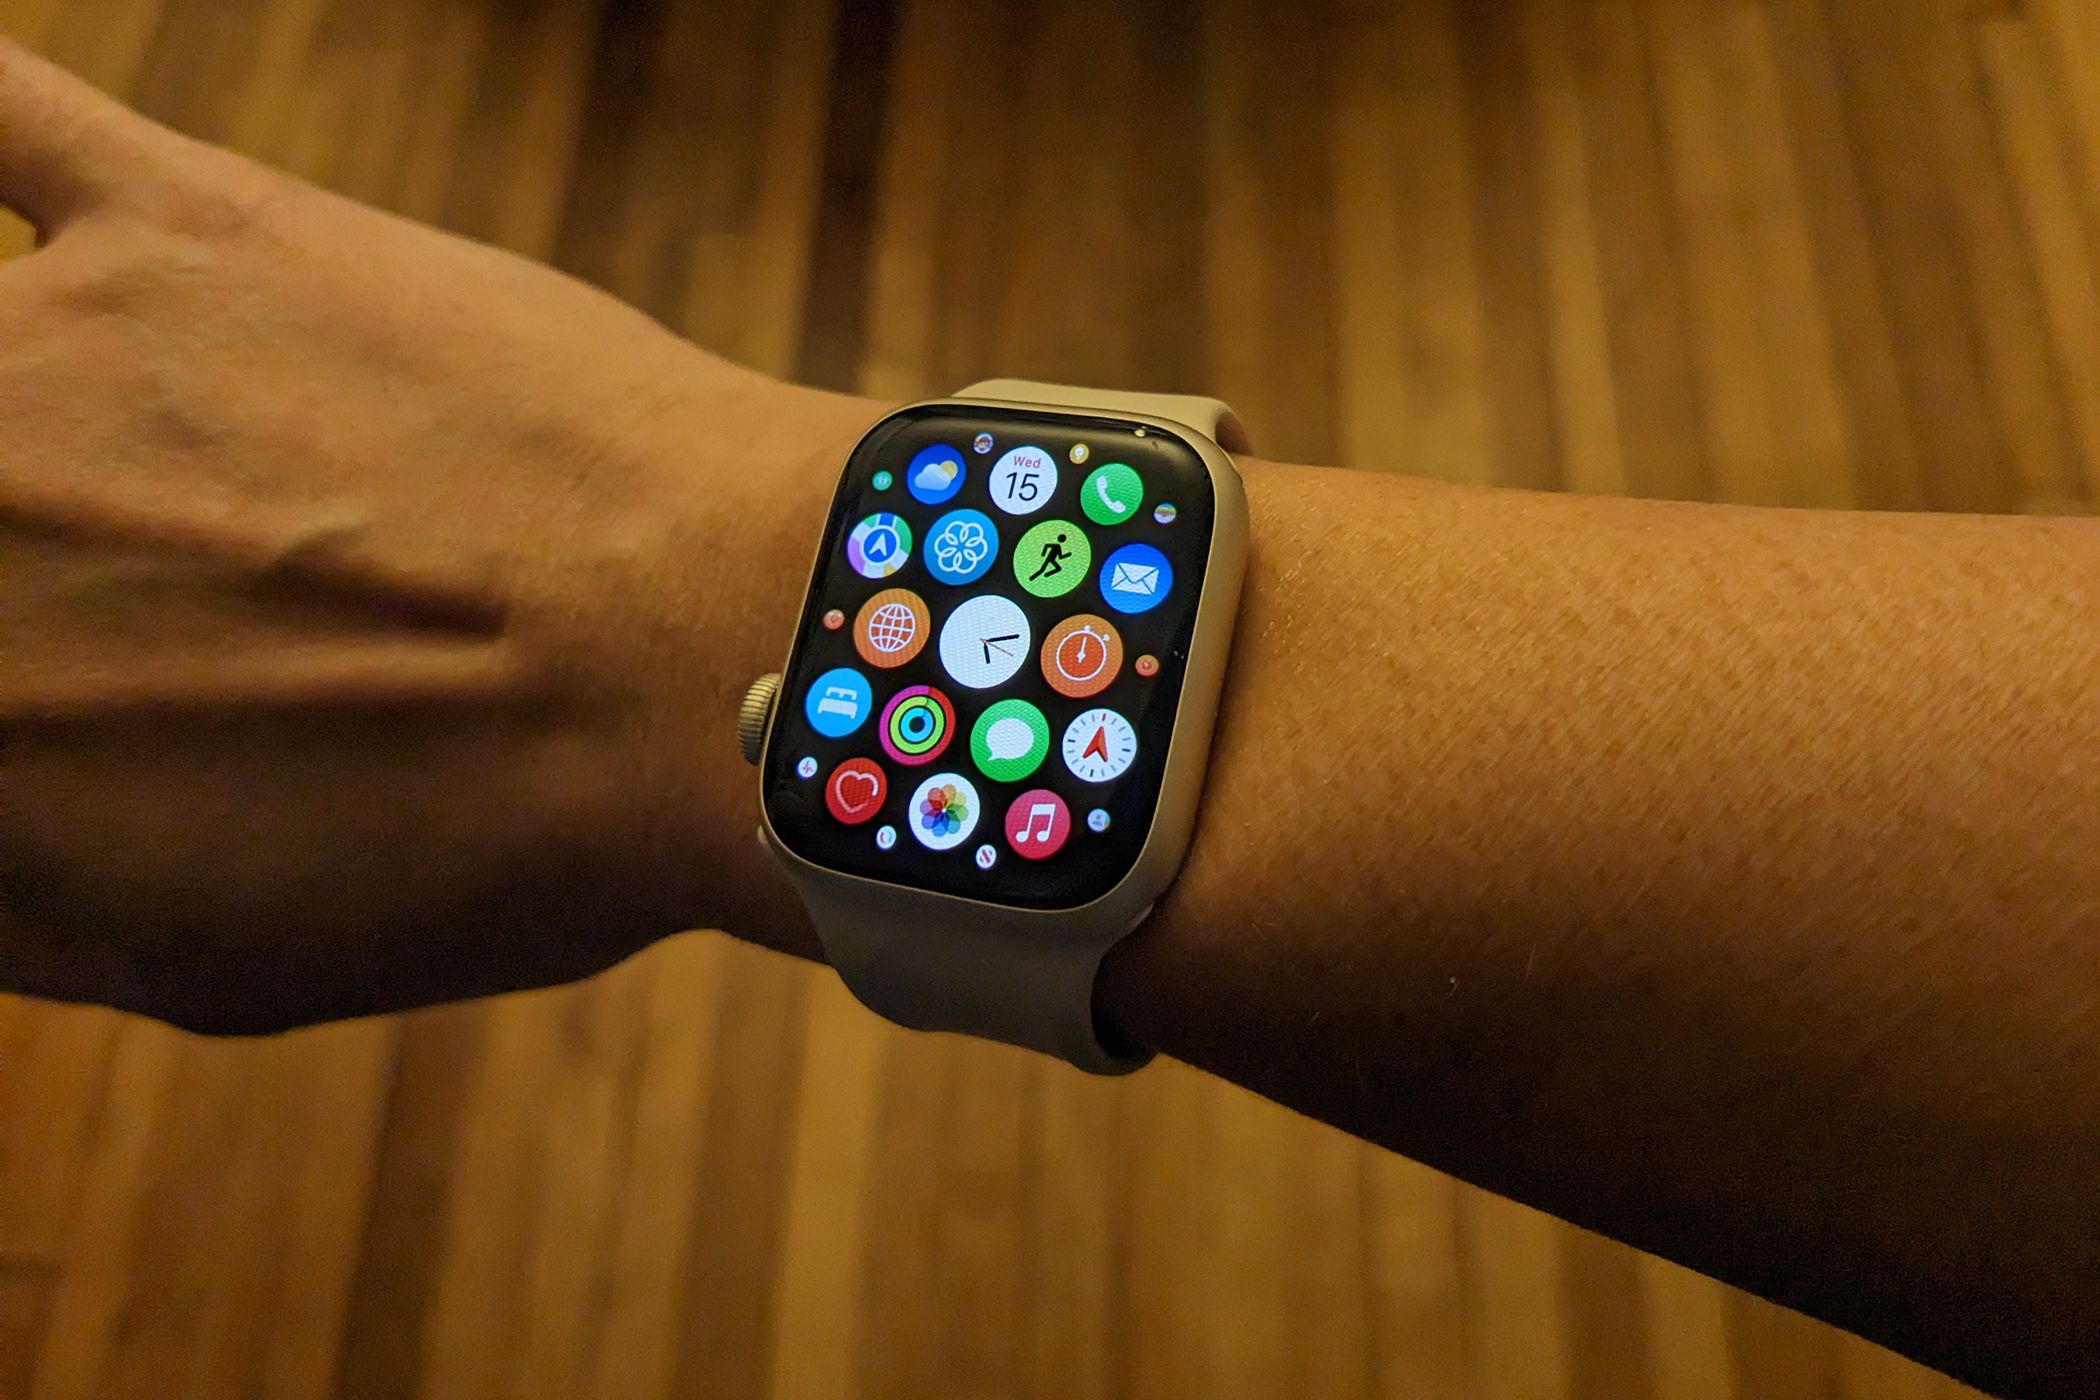 Do regular iPhone apps work on the Apple Watch, or do they have to be  specifically designed for that device? - Quora